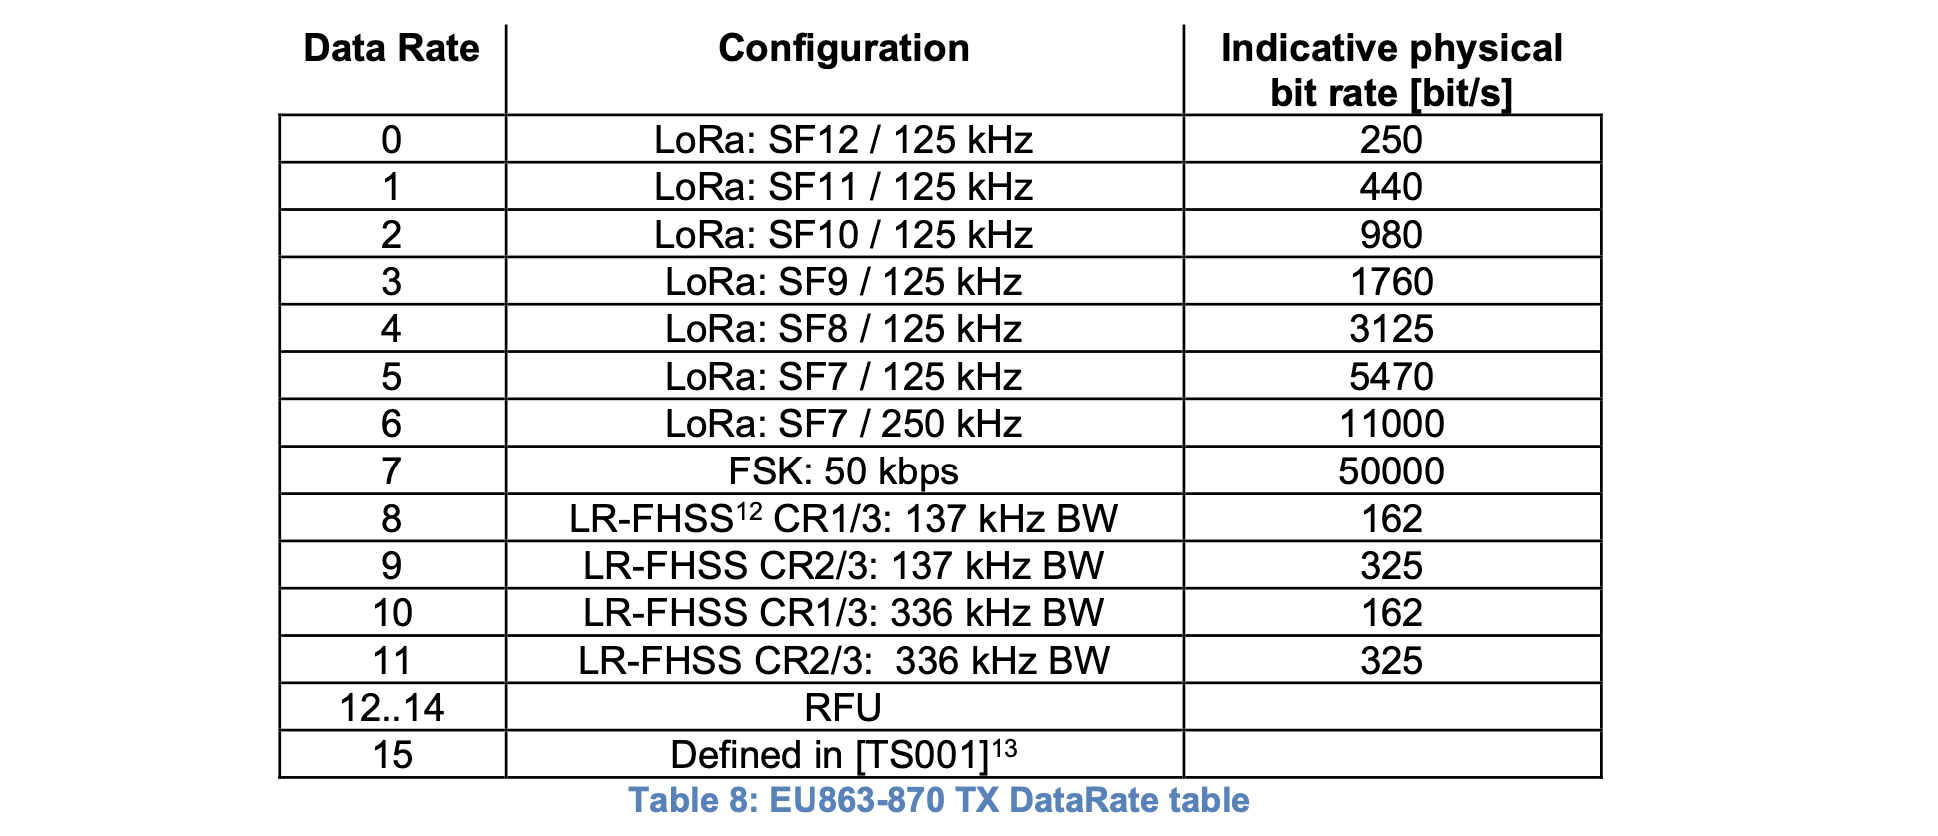 Table showing the mapping of Data Rate codes to EU863-870 configuration. Source: RP002-1.0.3 LoRaWAN Regional Parameters